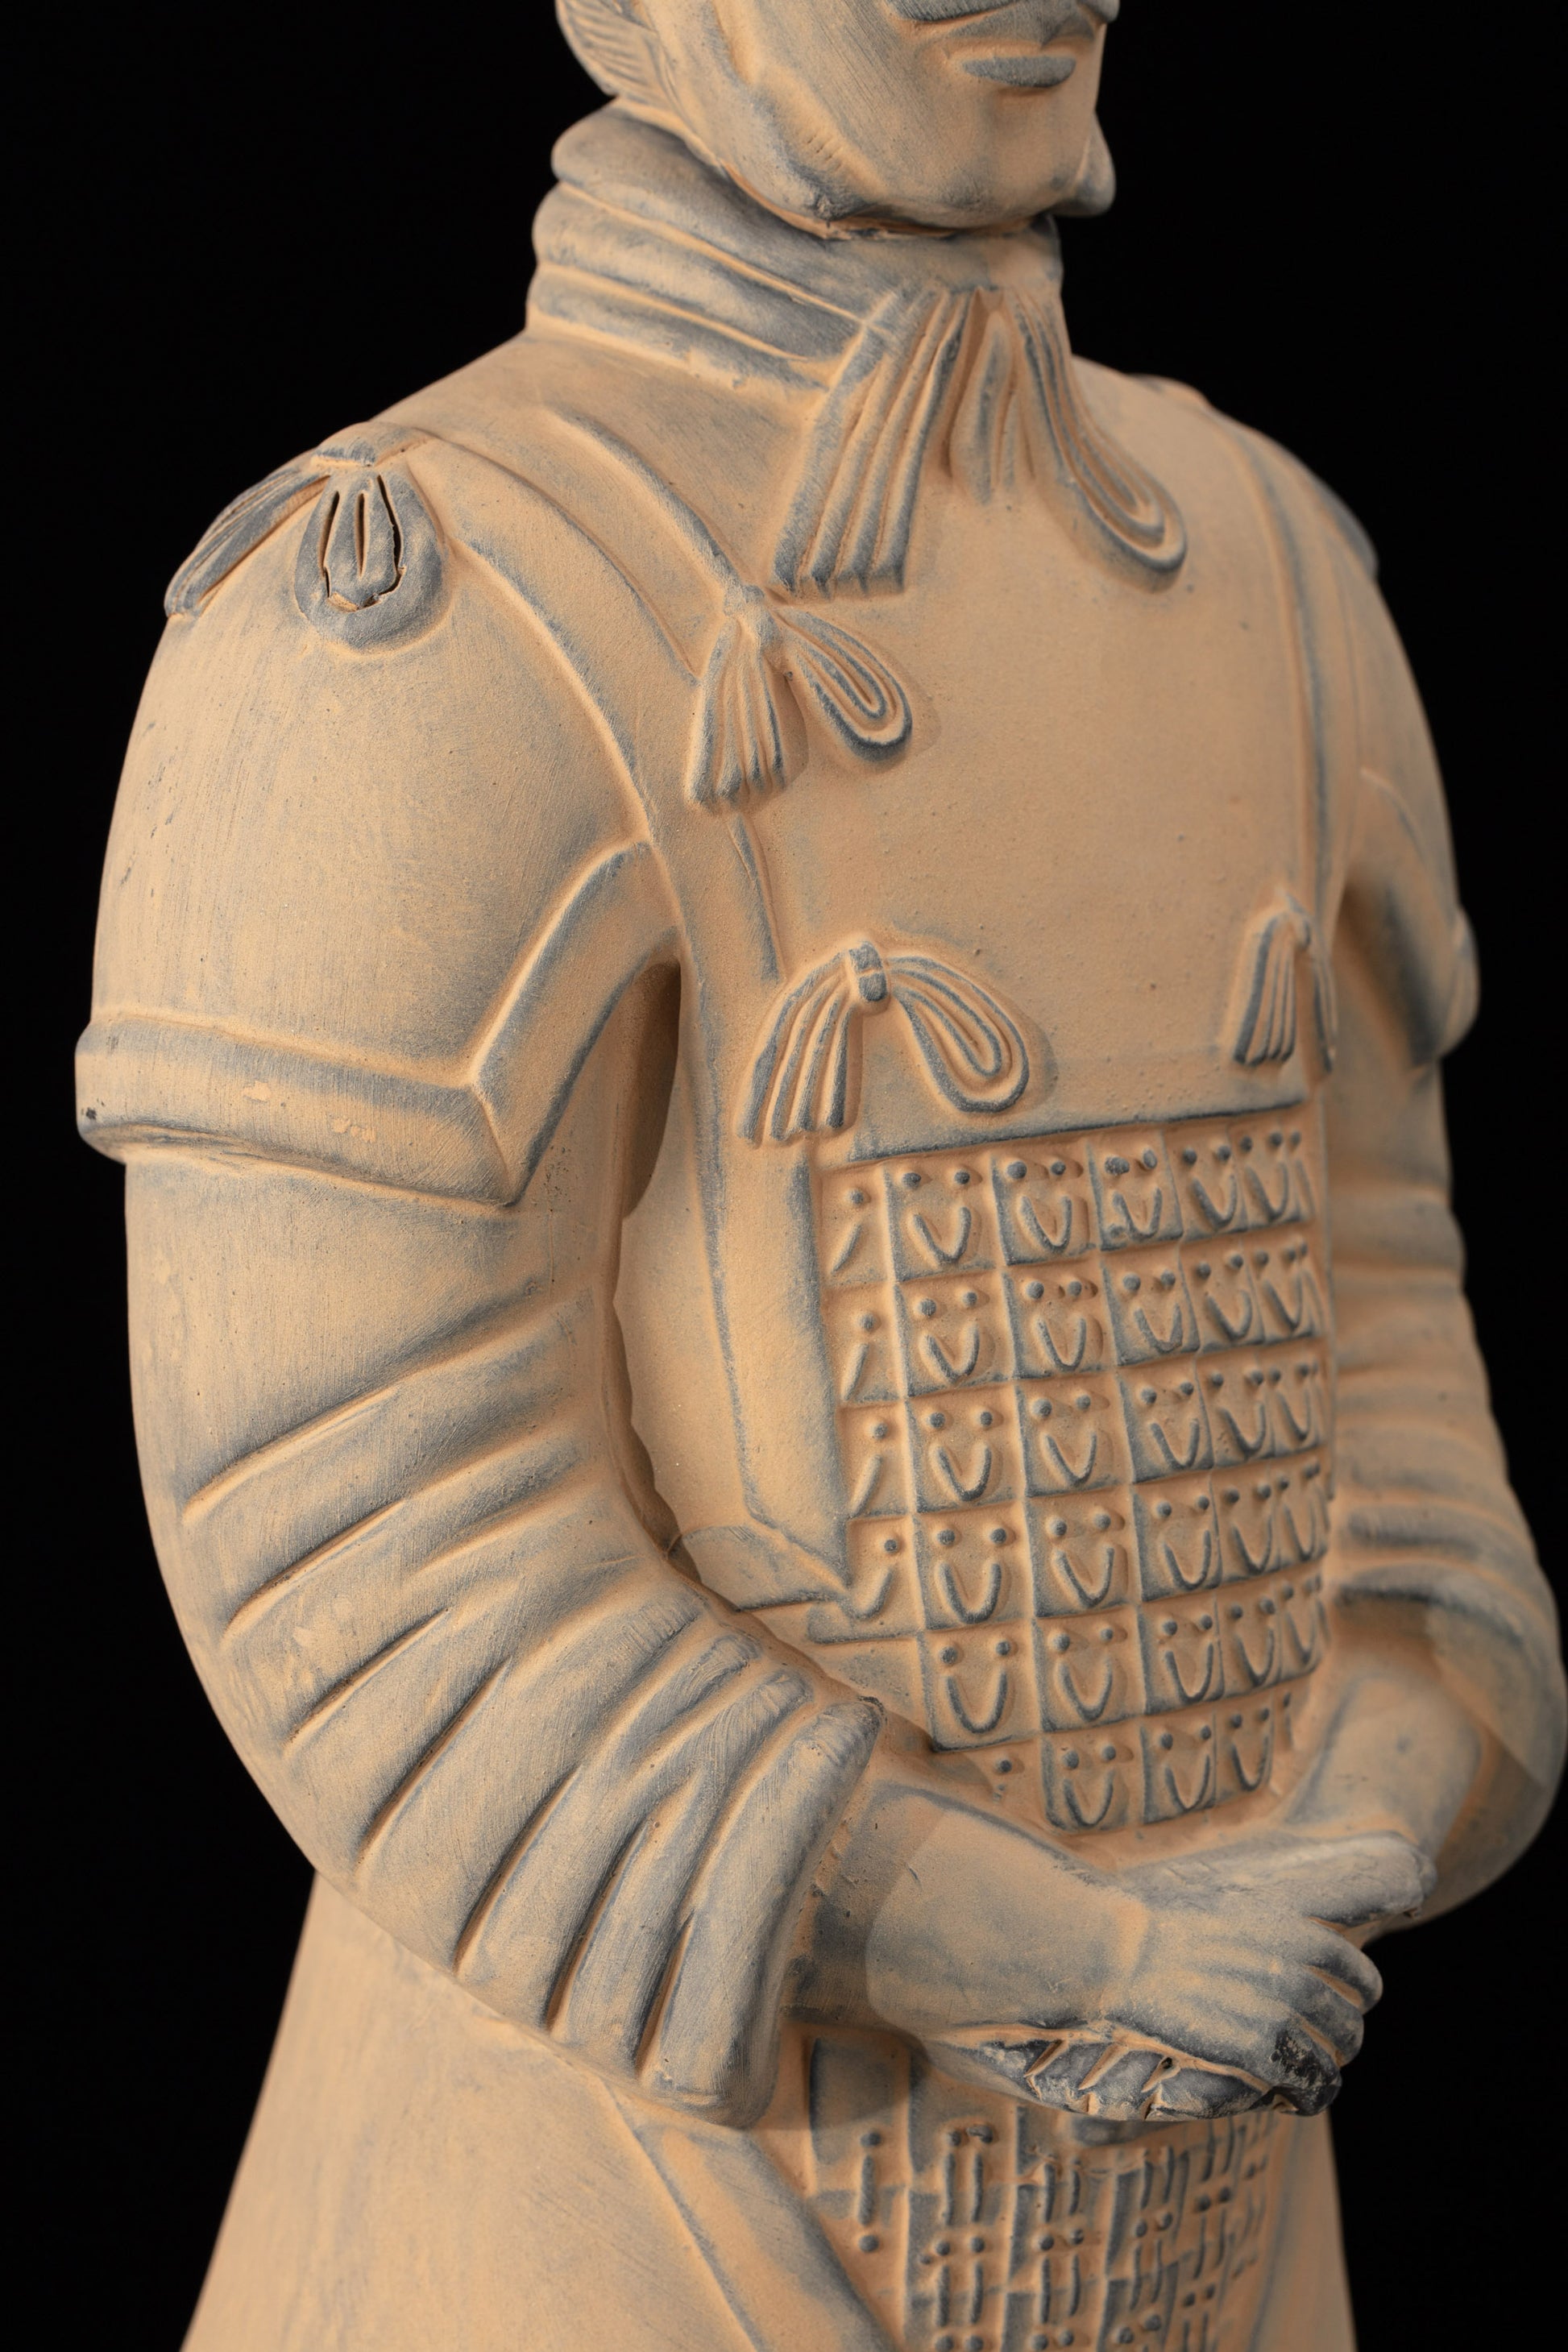 55CM General - CLAYARMY-Military Precision and Grace: Detailed view of the 55CM General, embodying military precision and grace in the sculpted details of armor and accessories.